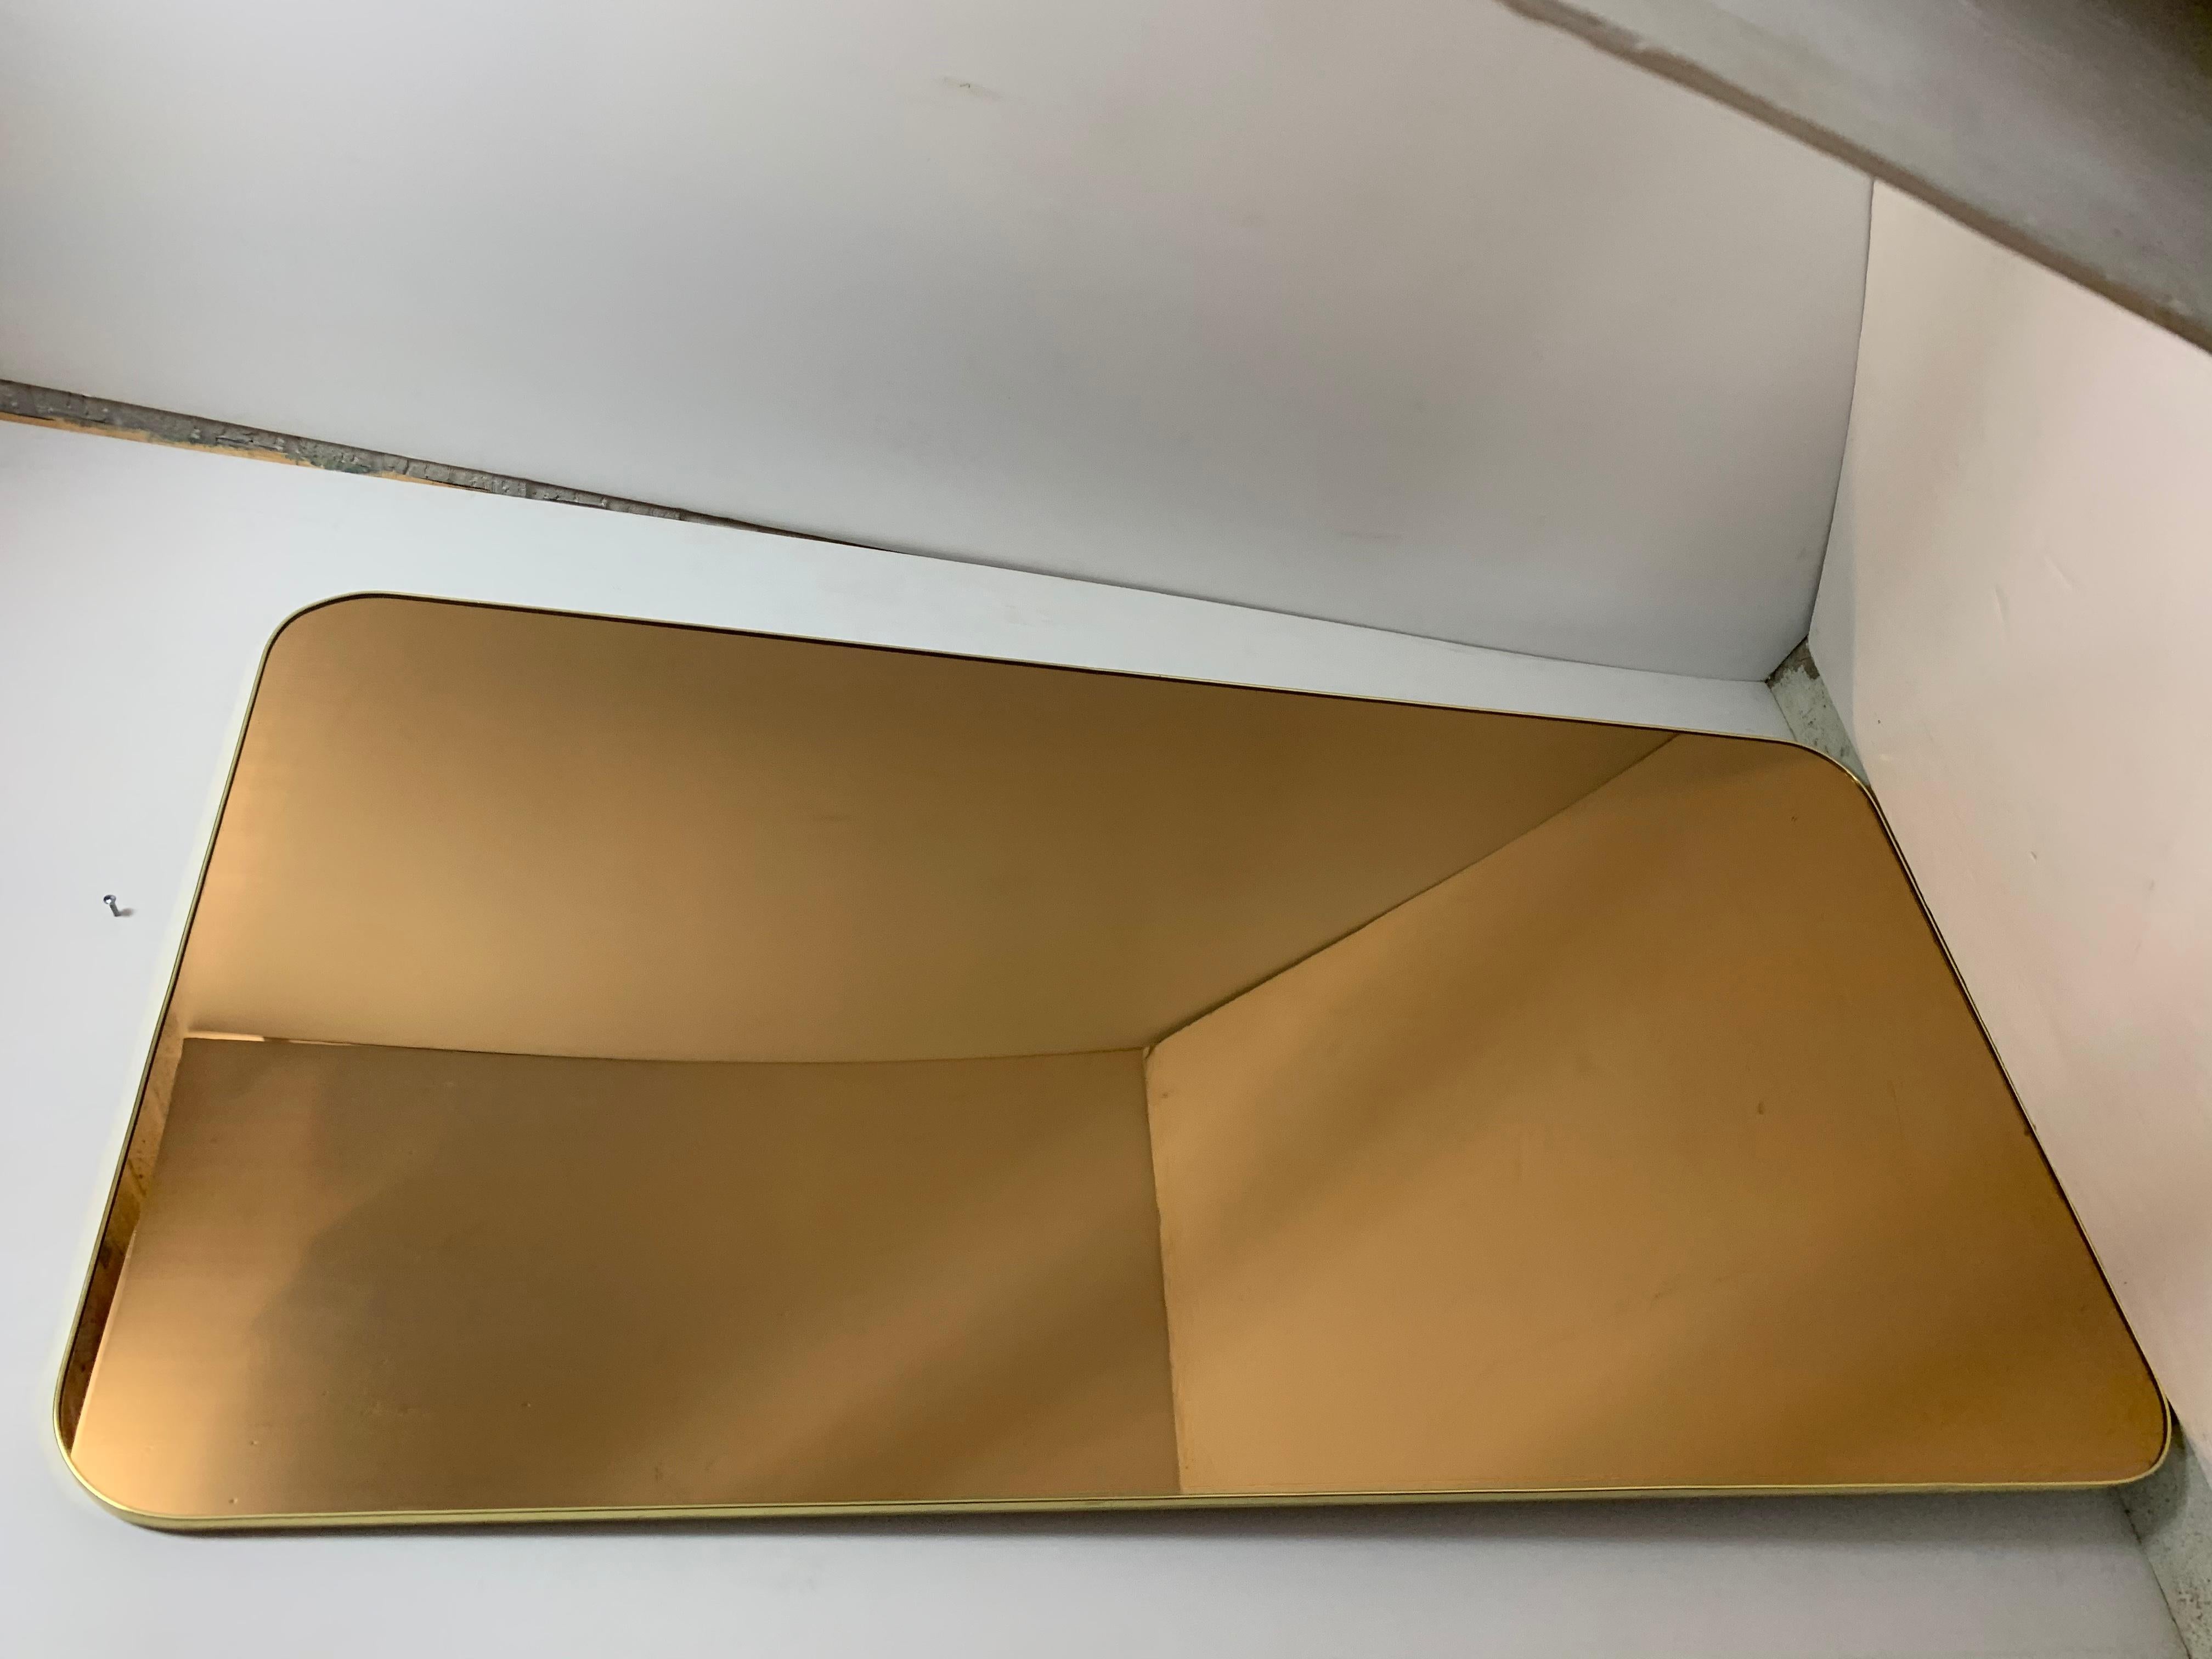 Large full size gold smoked rectangle mirror, horizontal or vertical narrow and thin framed with bronzed smoke glass, totally different than any other mirror, yet still functional, excellent for a bar or a restaurant.